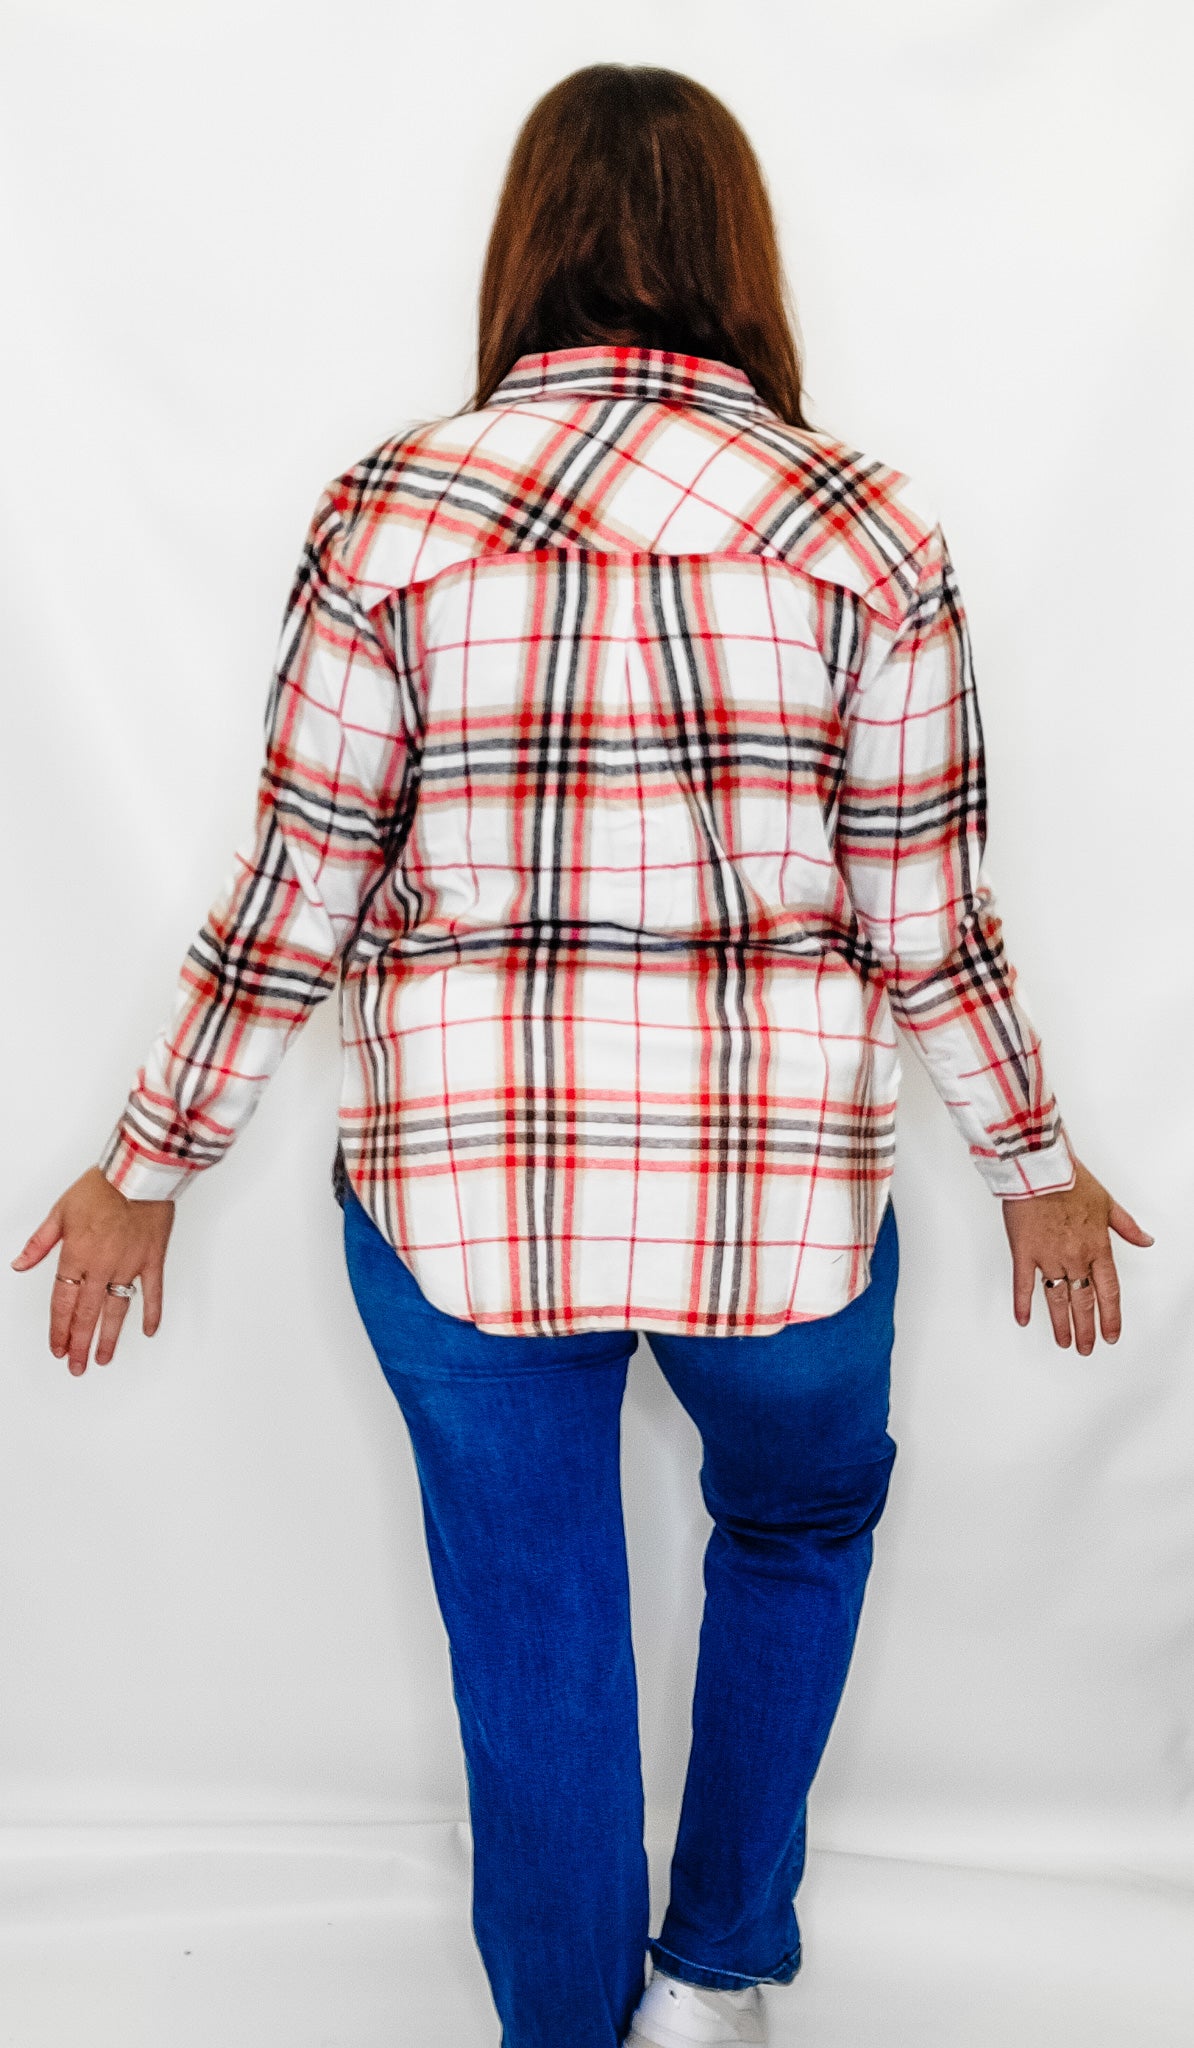 Panache Ivory, Red & Navy Plaid Flannel